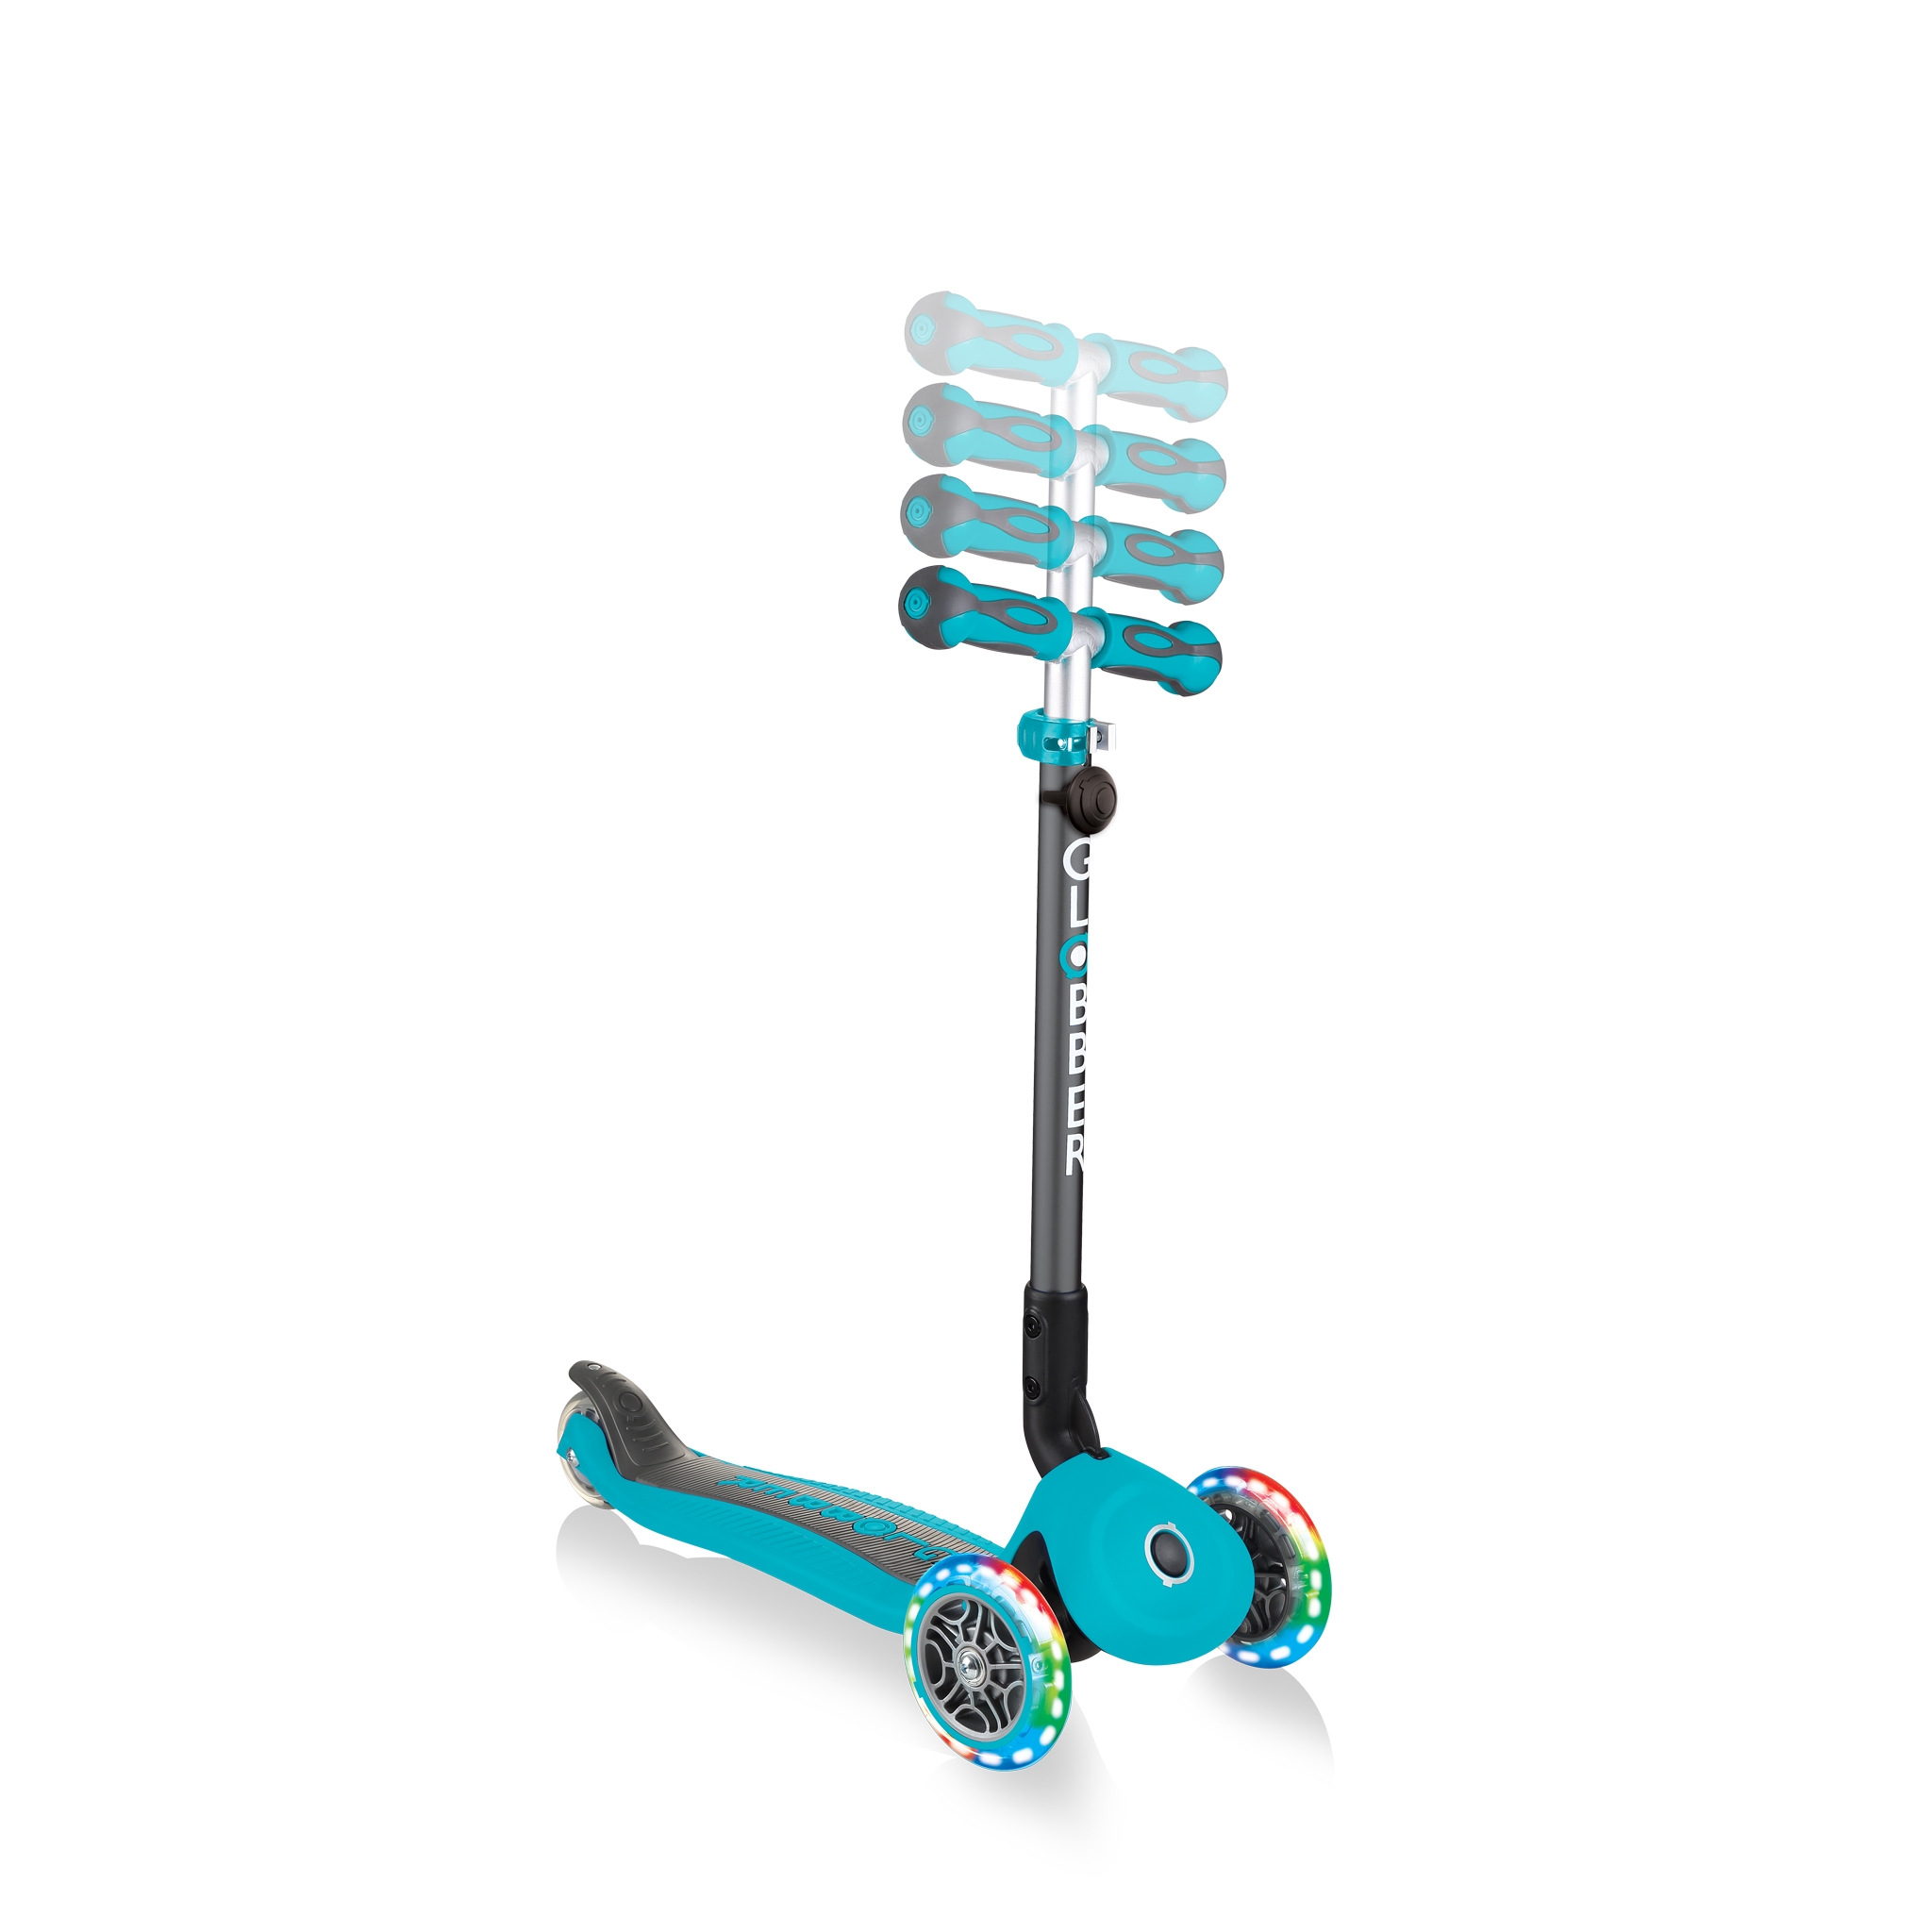 GO-UP-DELUXE-LIGHTS-ride-on-walking-bike-scooter-with-4-height-adjustable-T-bar-and-light-up-wheels-teal 4